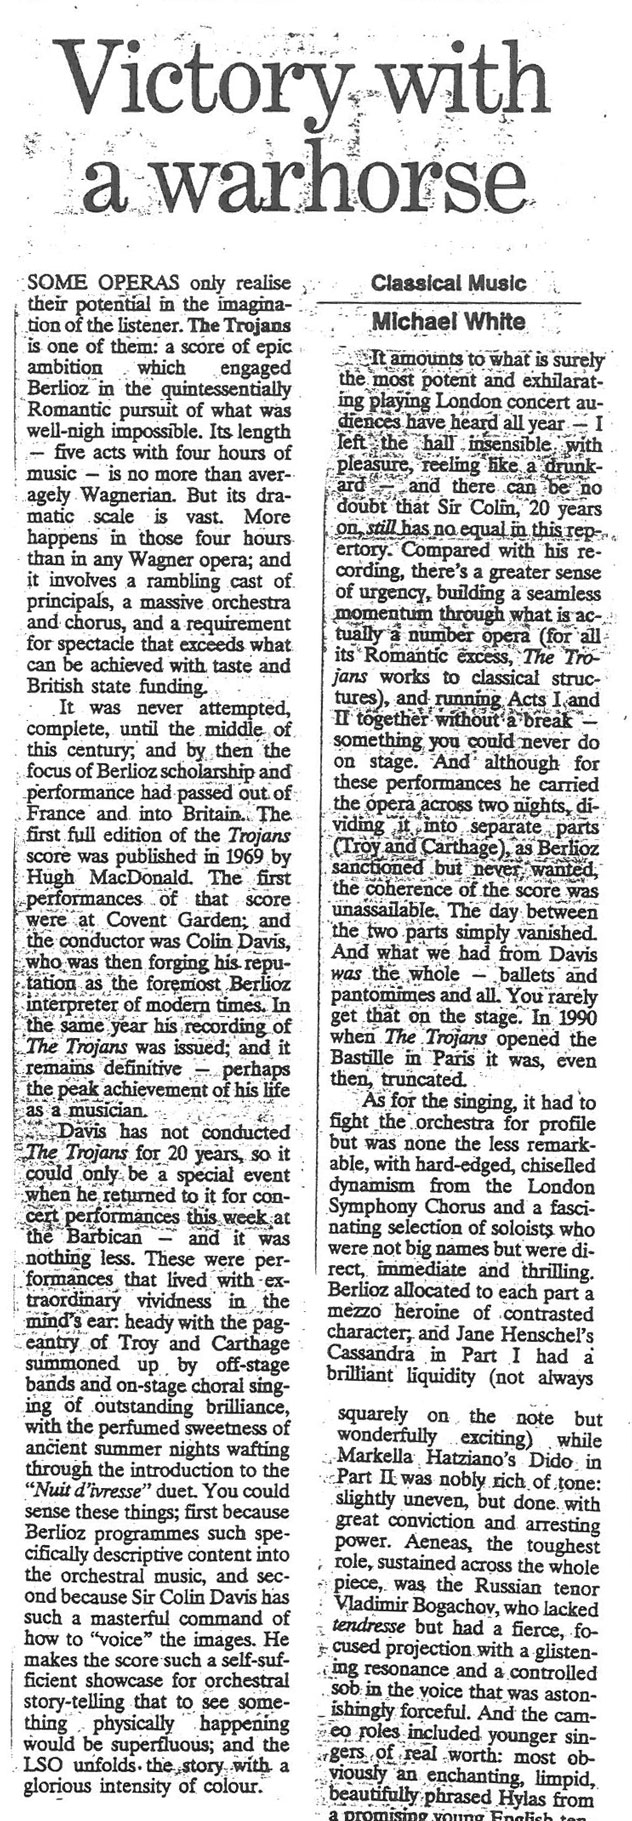 Review, 1993, The Independent on Sunday